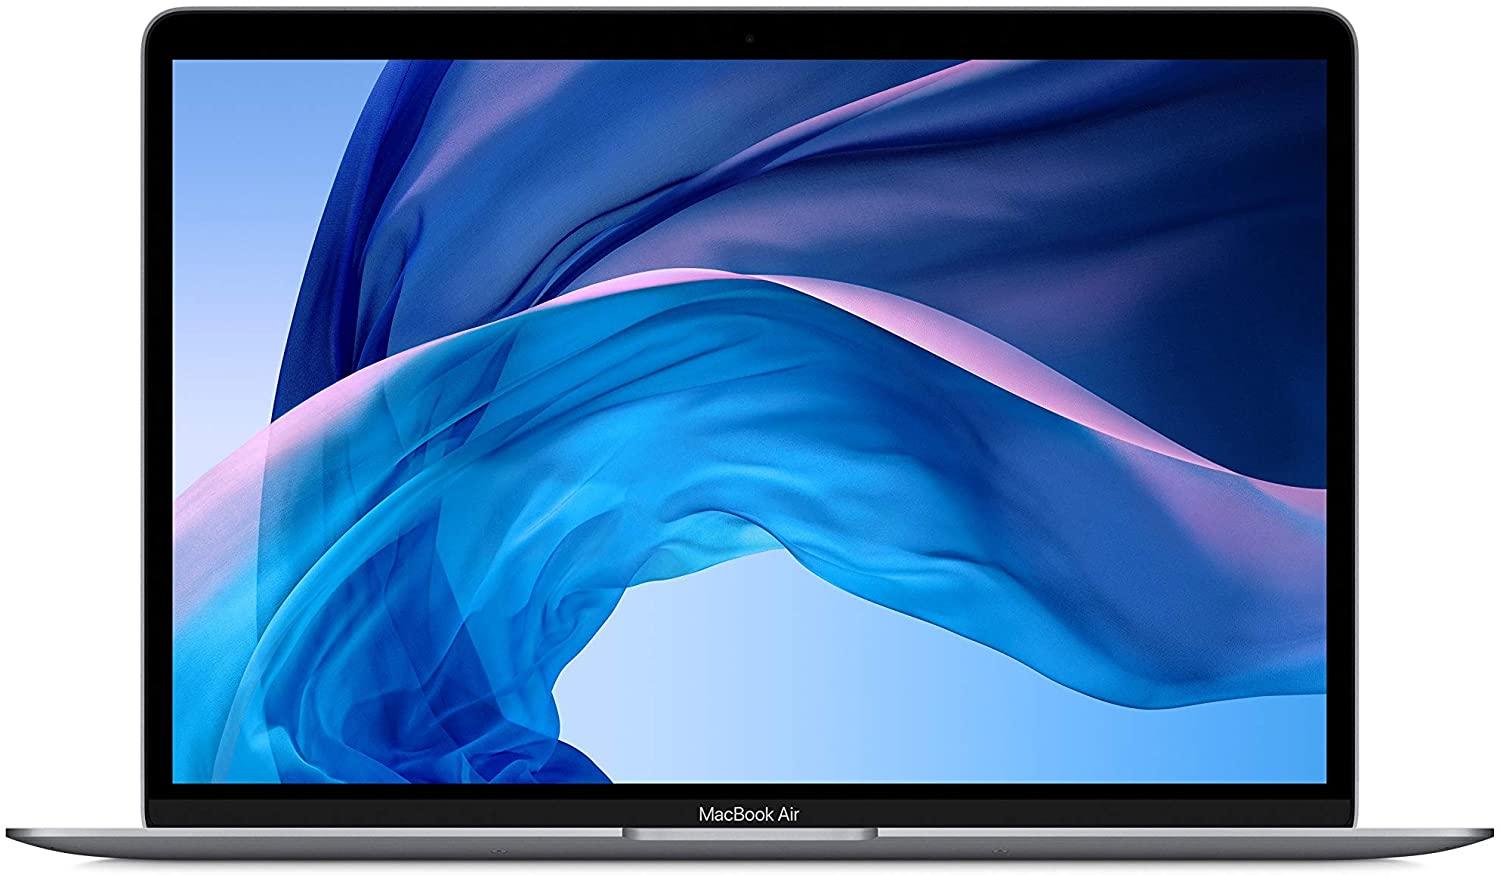 Apple MacBook Air 13in 8GB 256GB Notebook Laptop for $899.99 Shipped